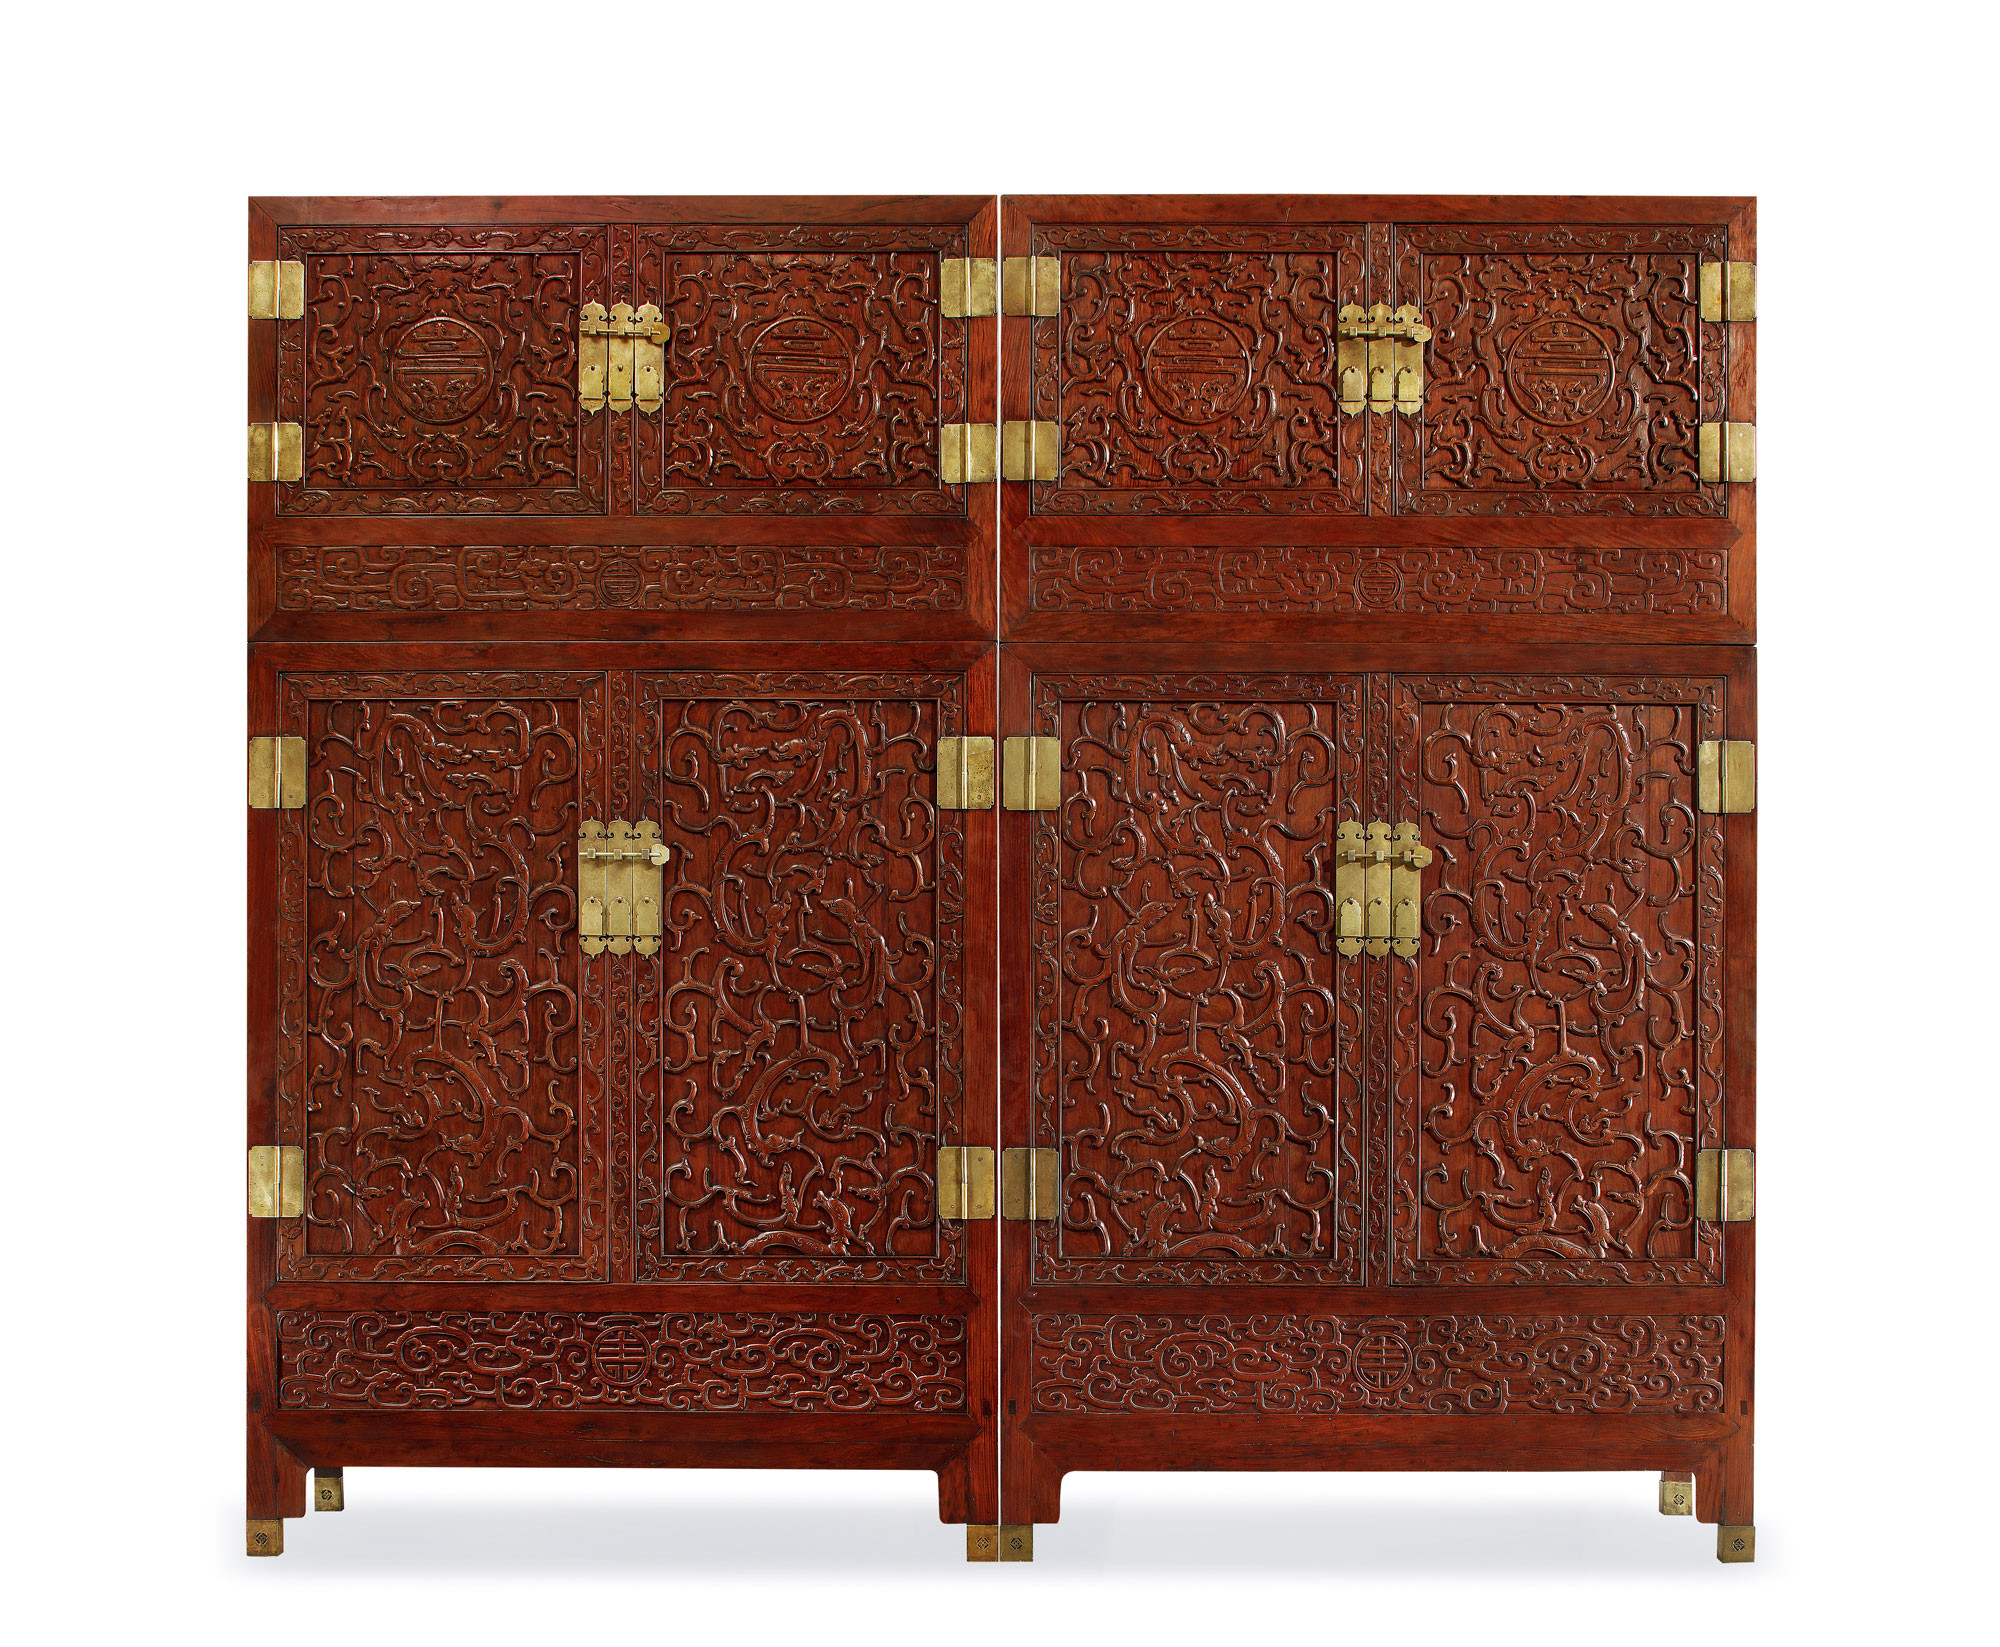 AN EXCEPTIONALLY RARE AND LARGE PAIR OF HUANGHUALI-WOOD ‘DRAGON’ CABINETS